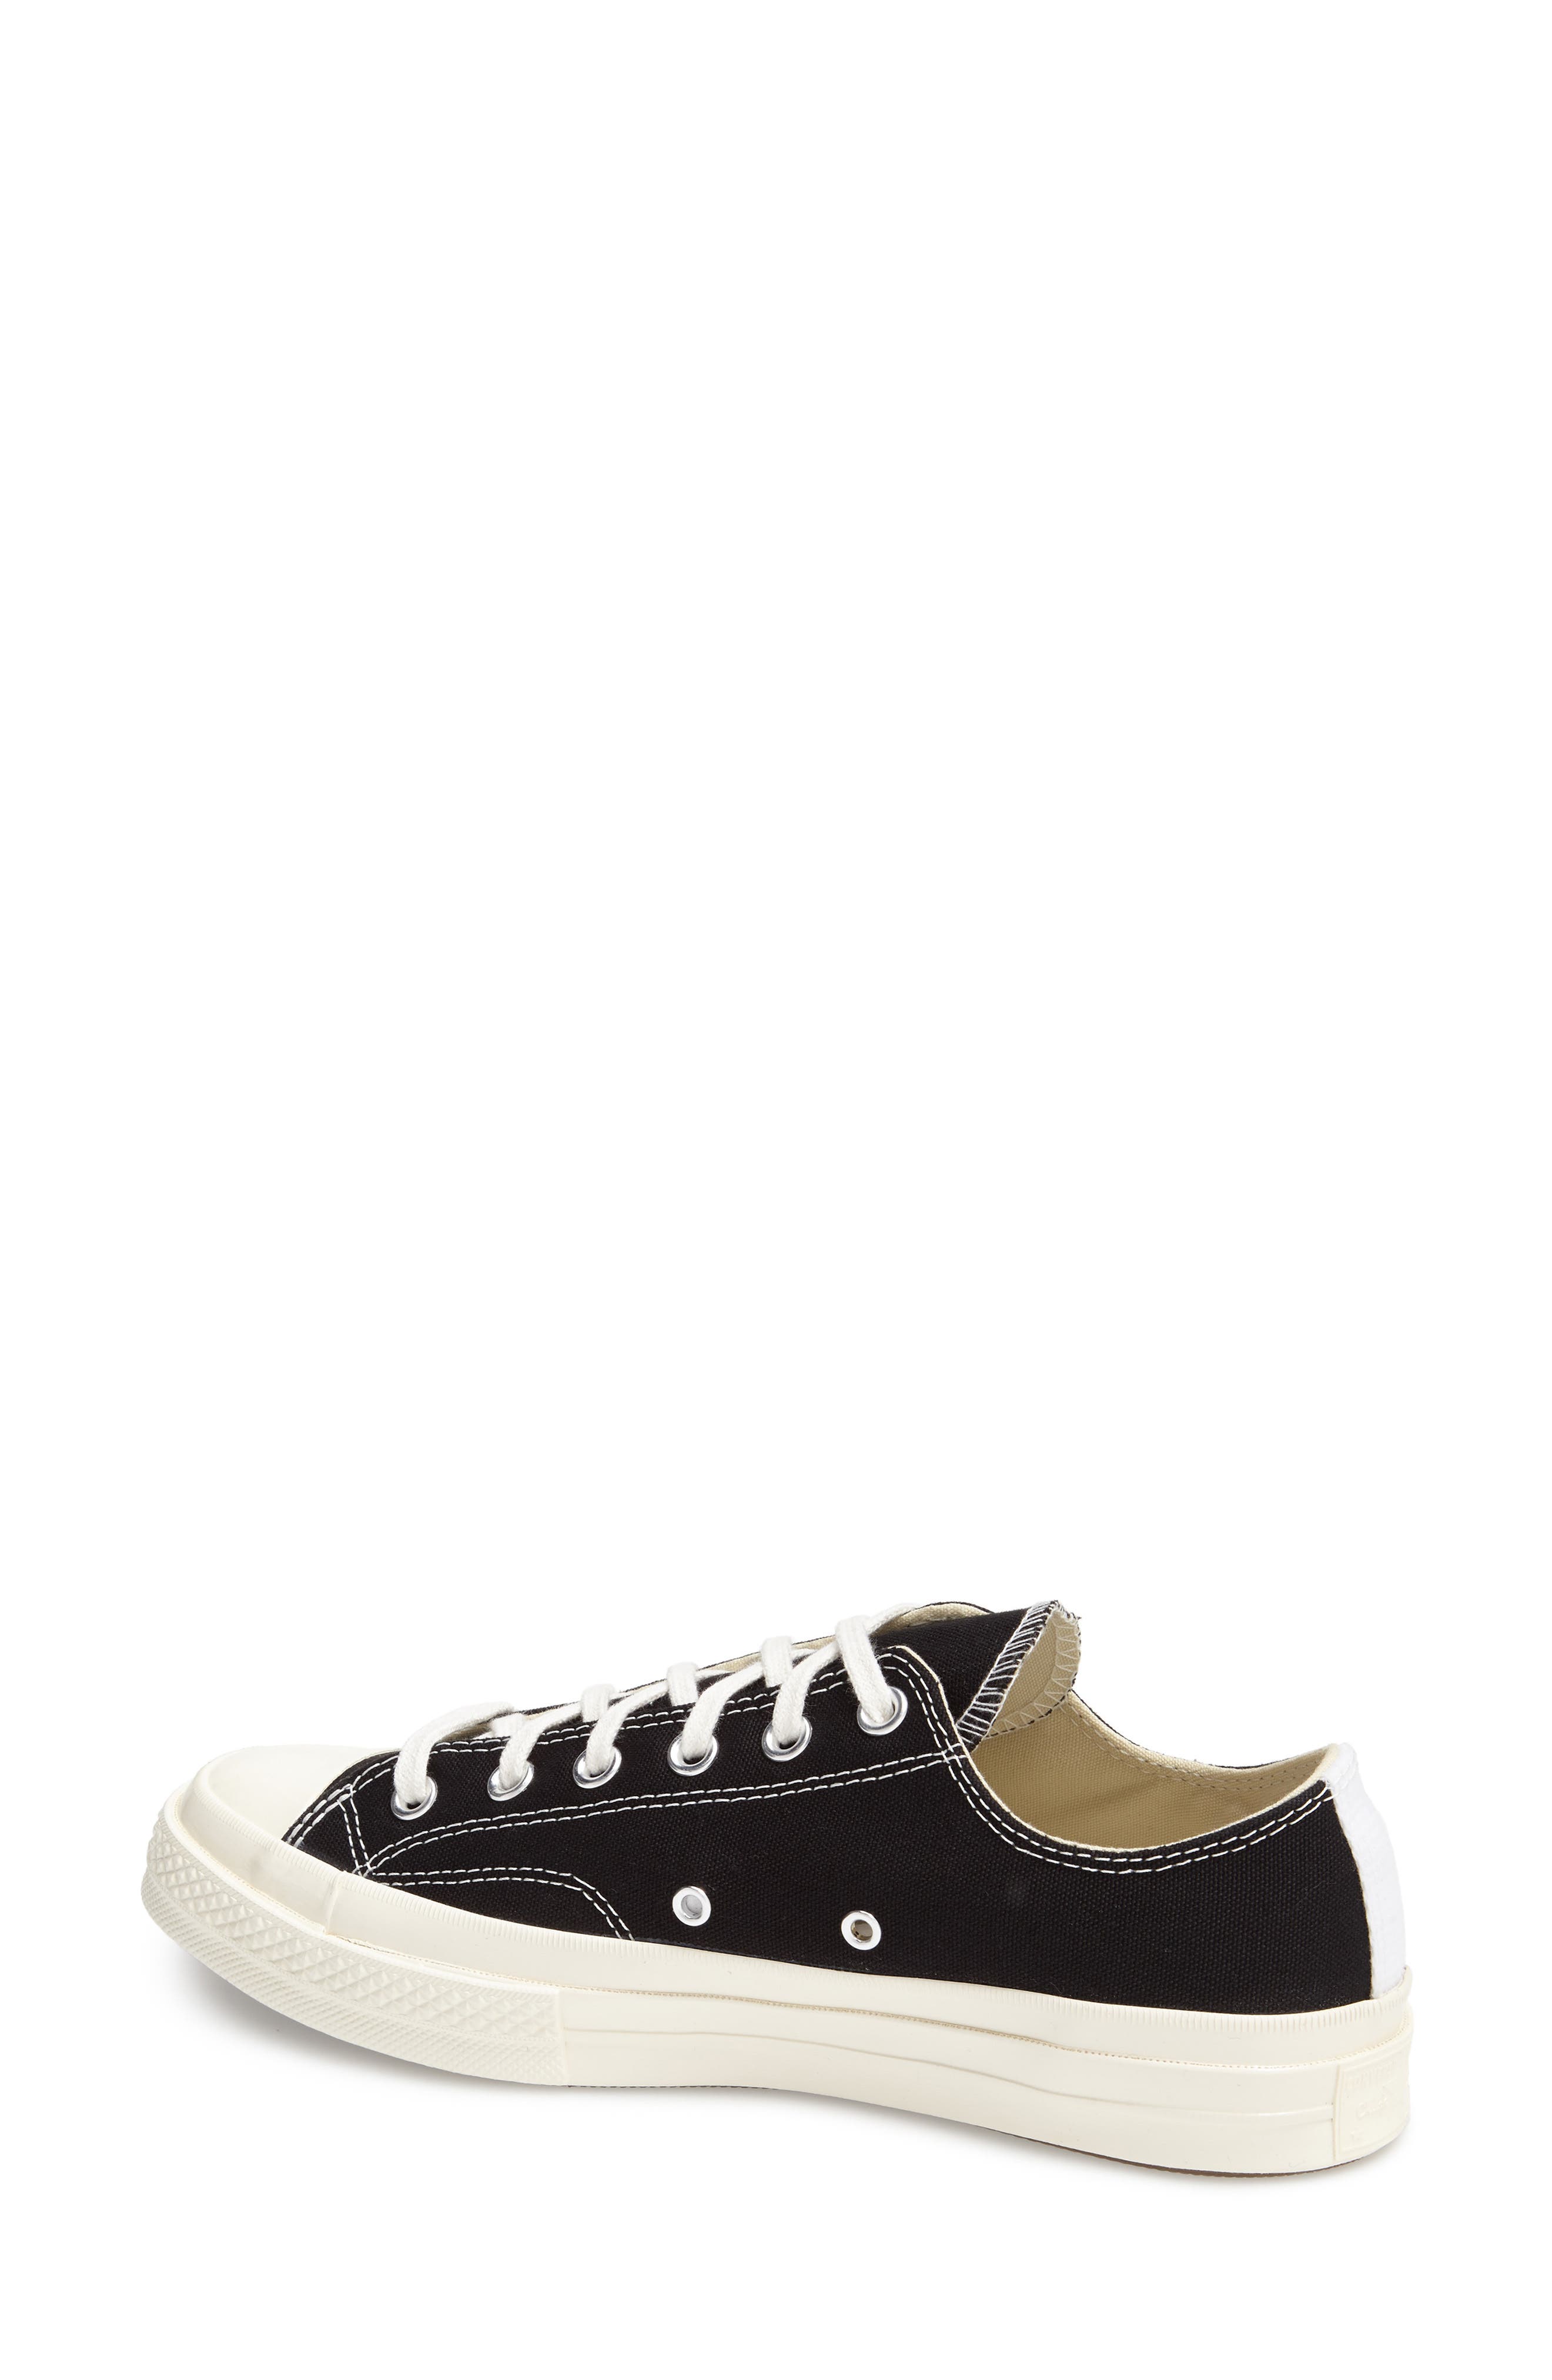 brands similar to converse